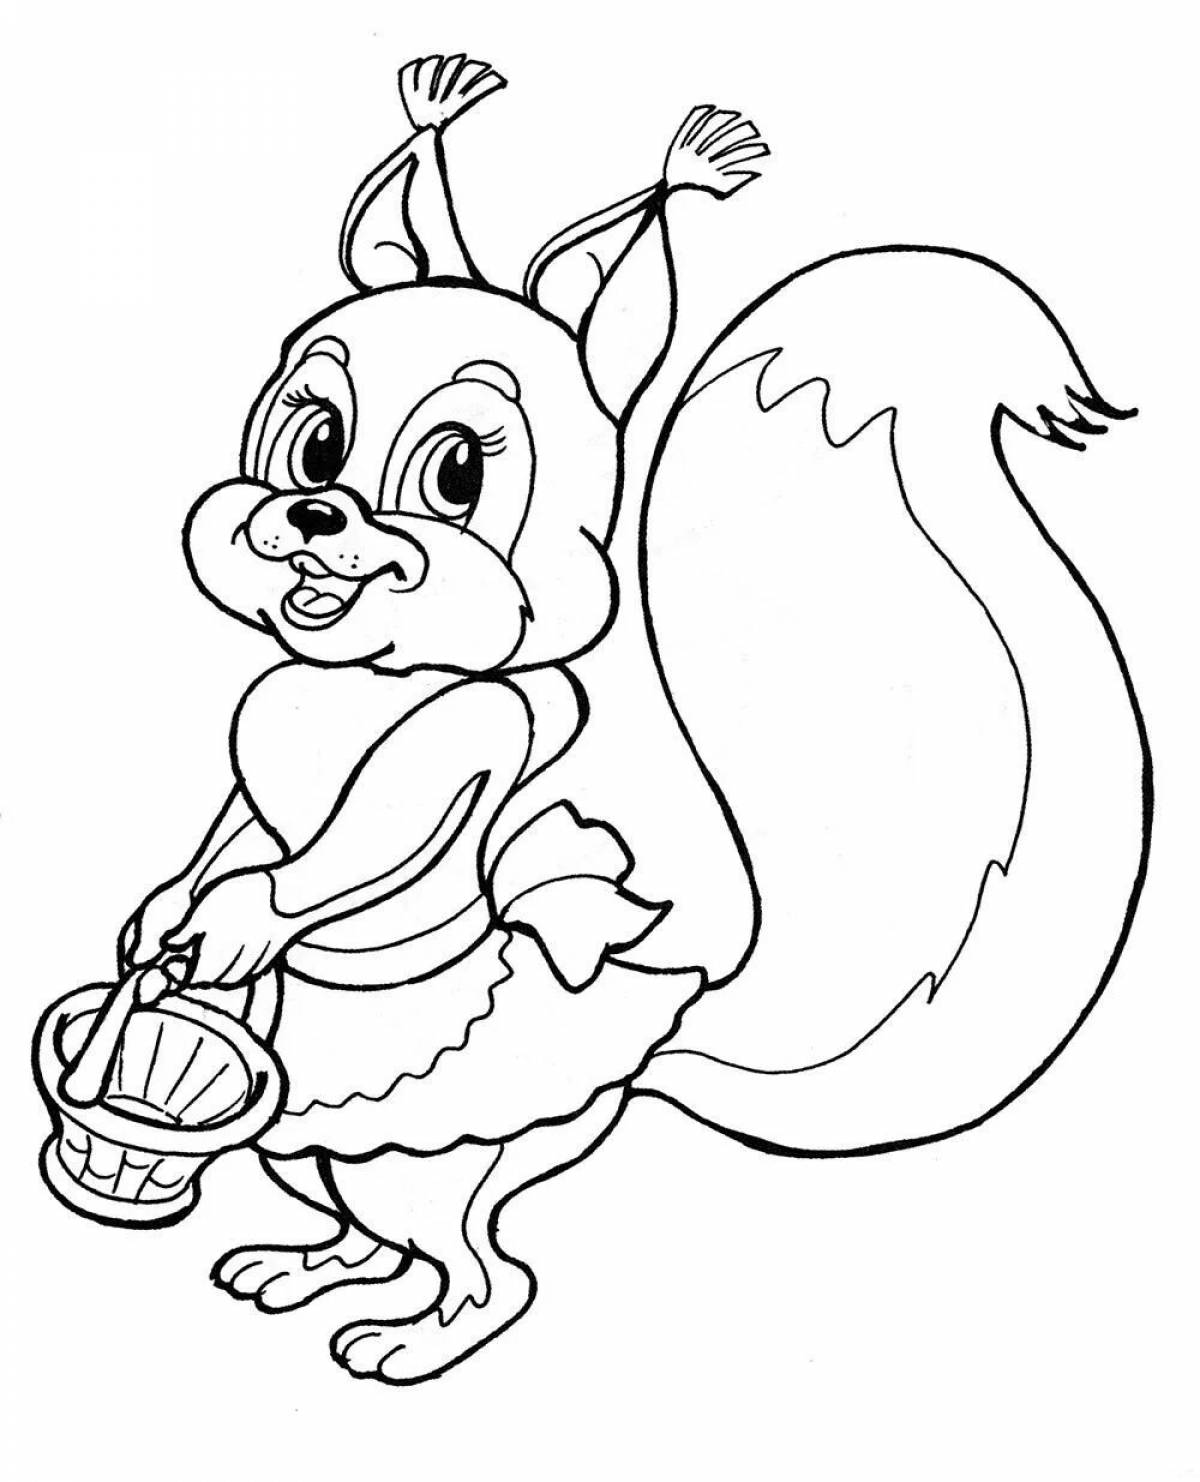 Squirrel for children 3 4 years old #10